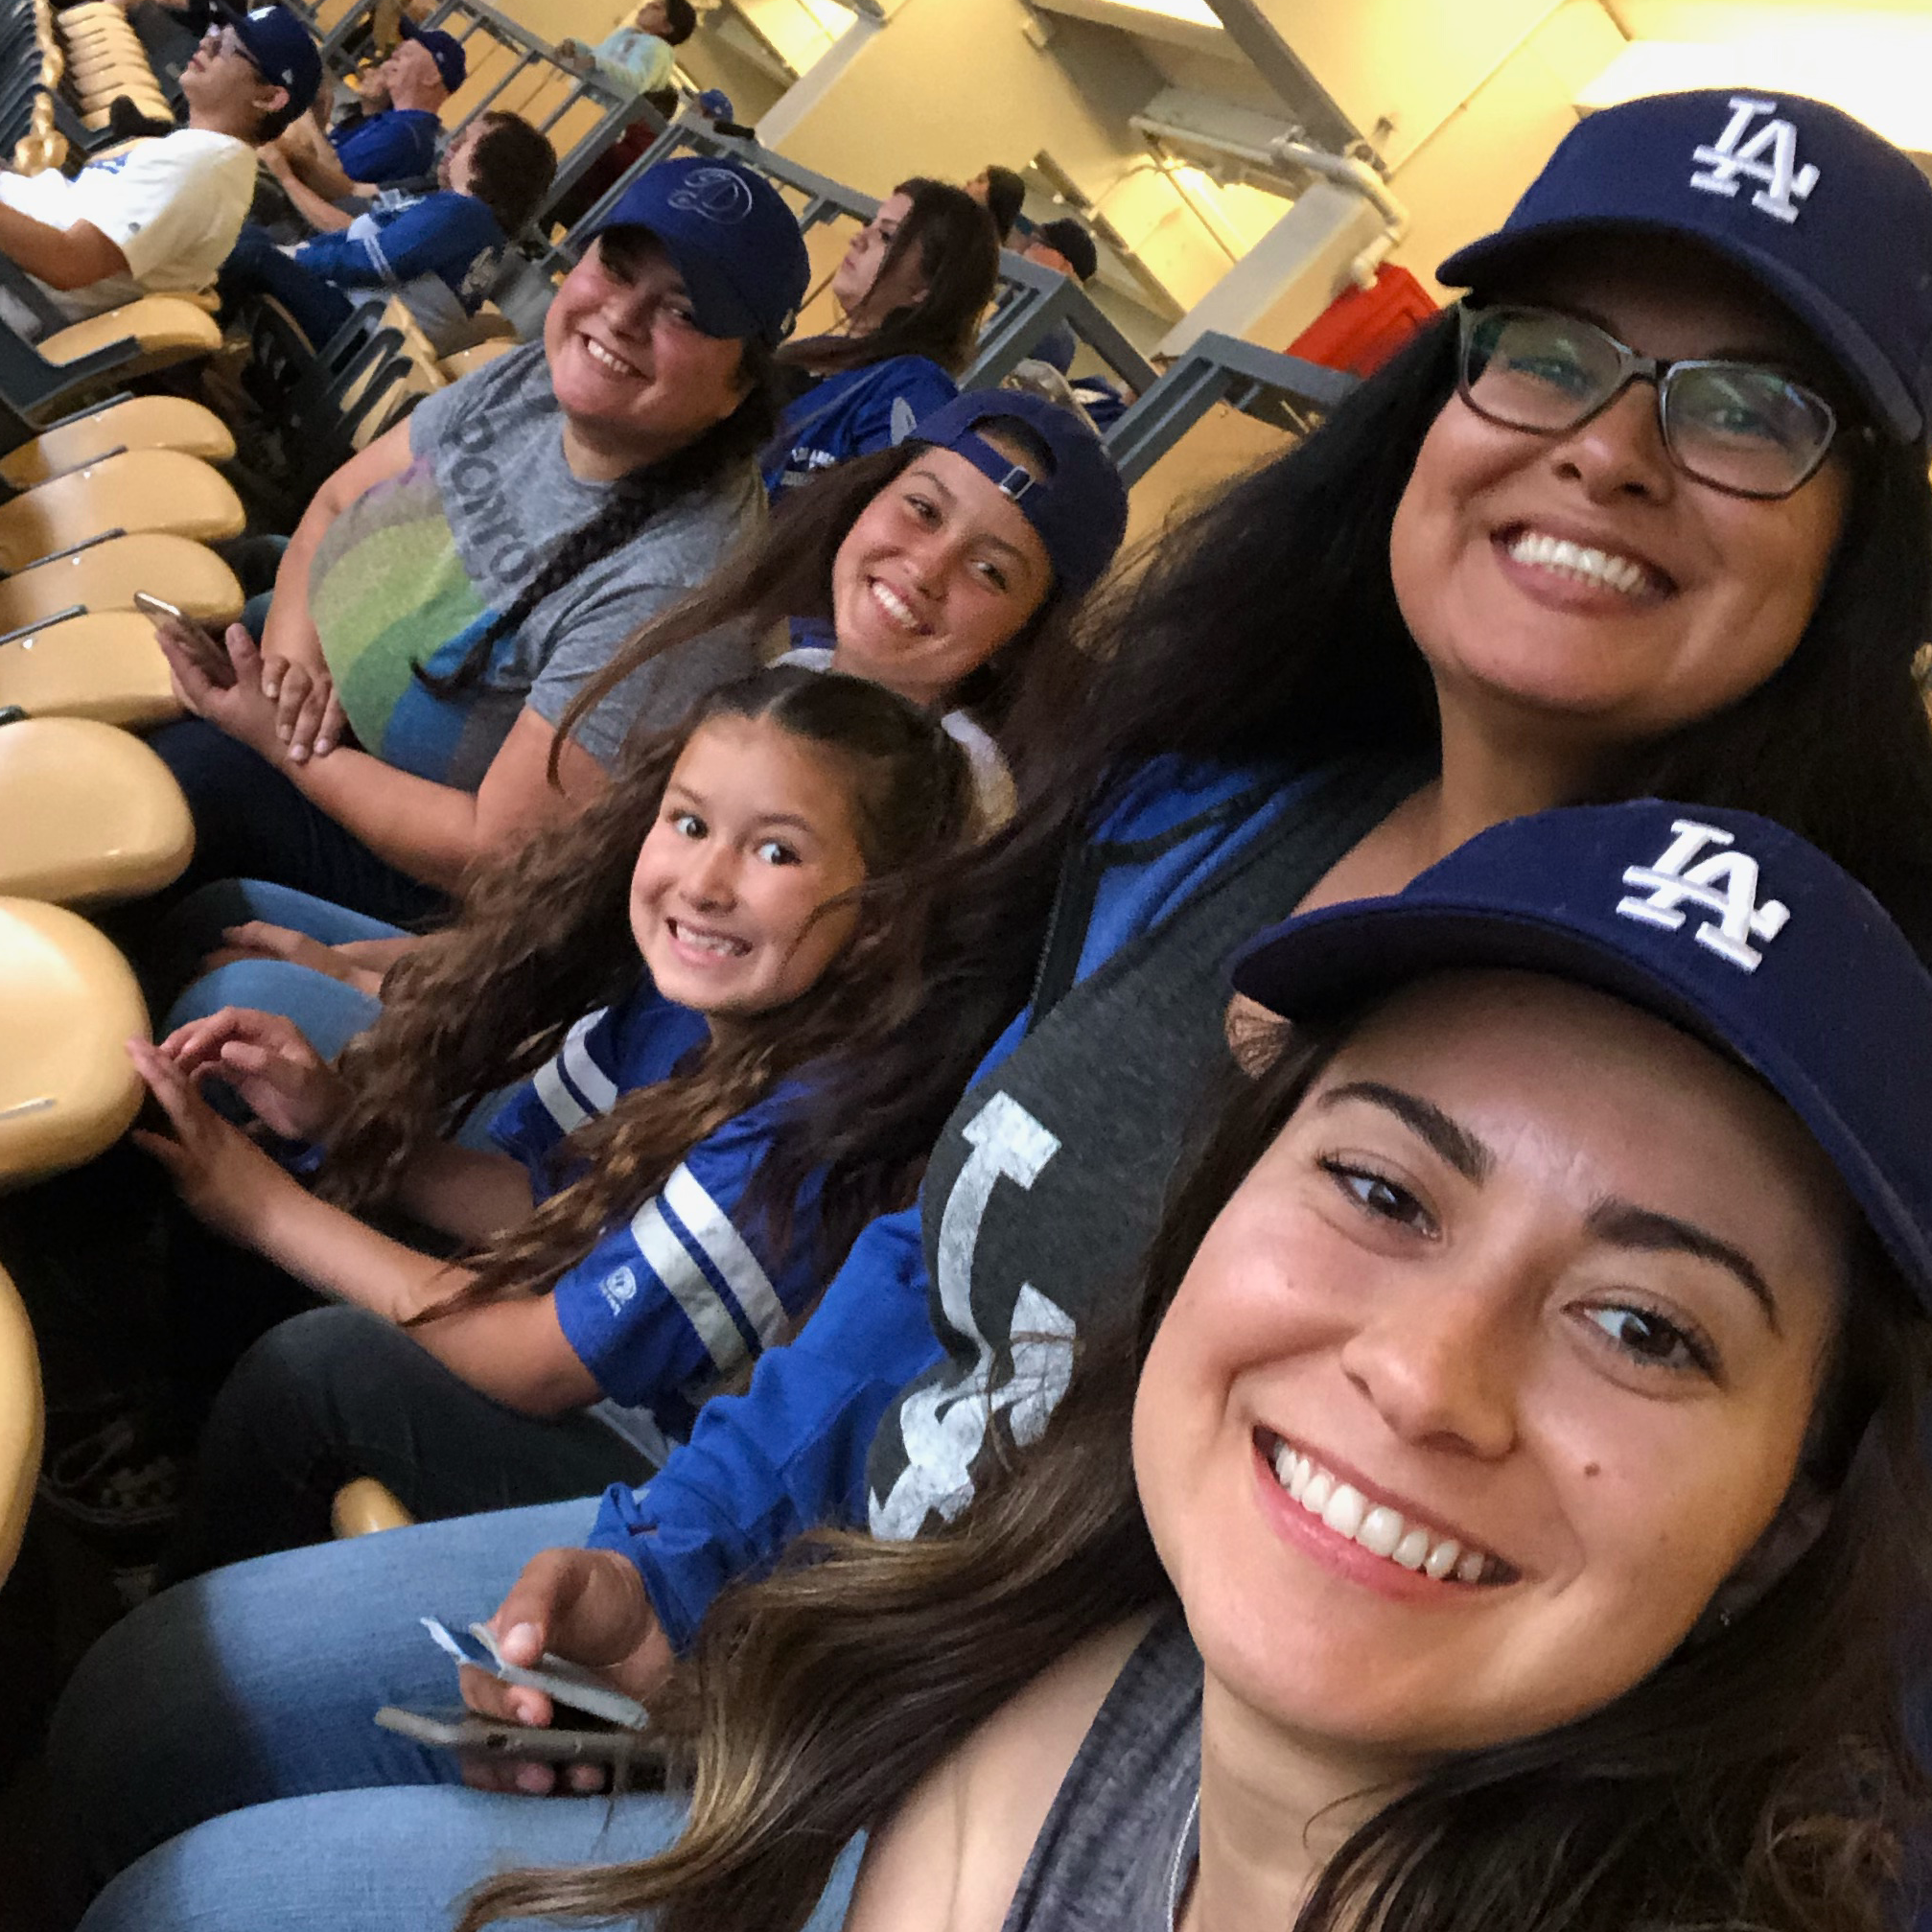 Dodger game with family